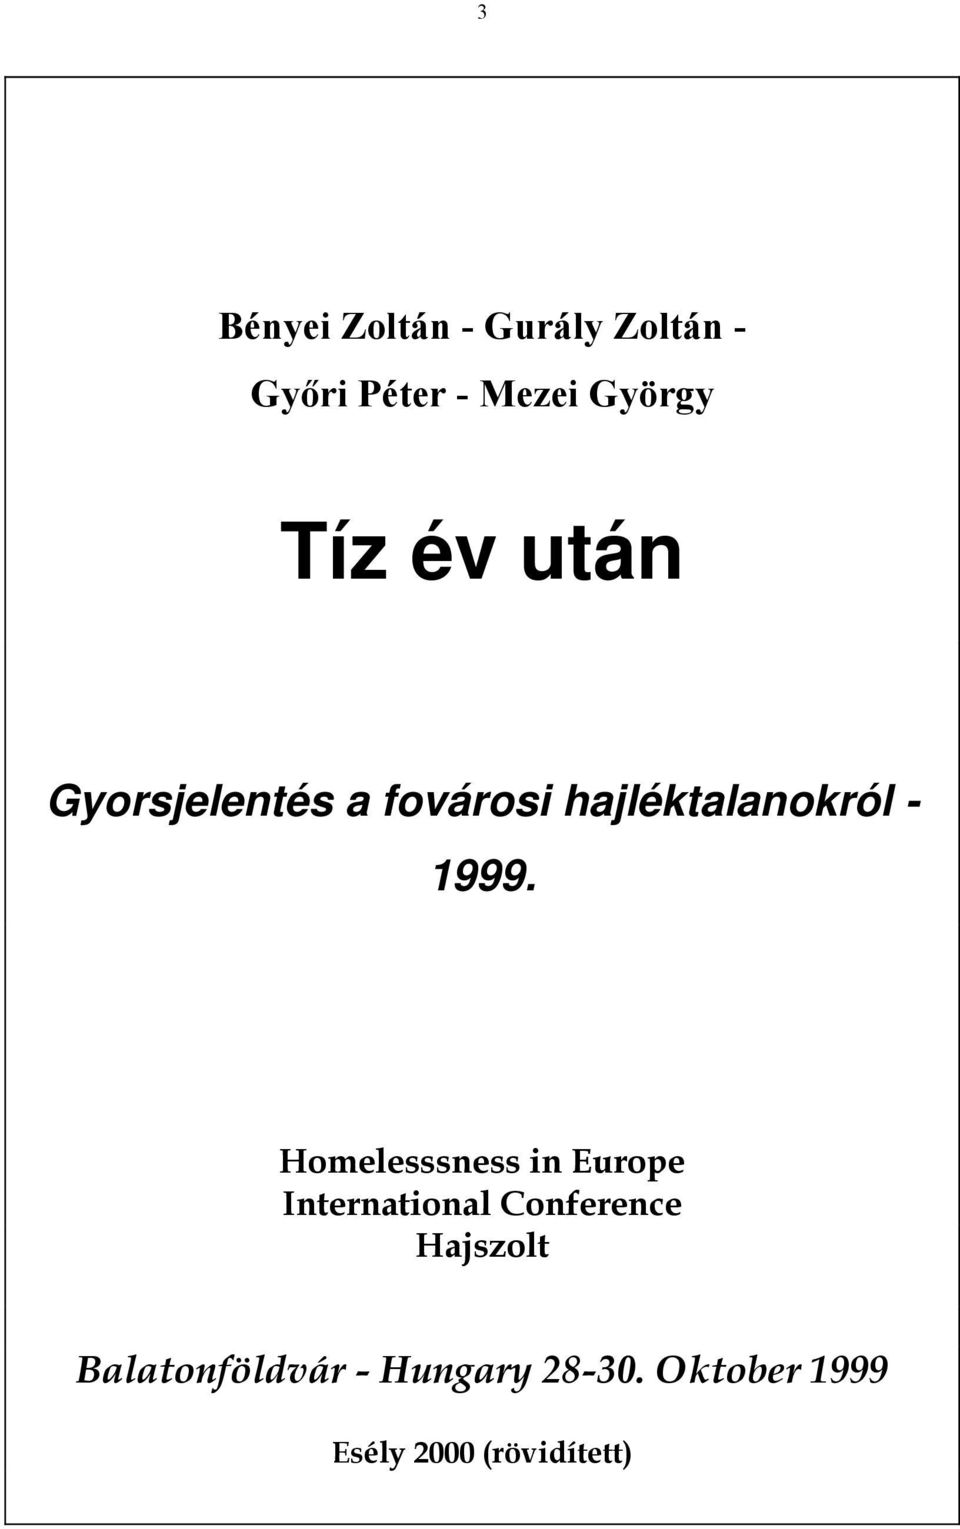 Homelesssness in Europe International Conference Hajszolt